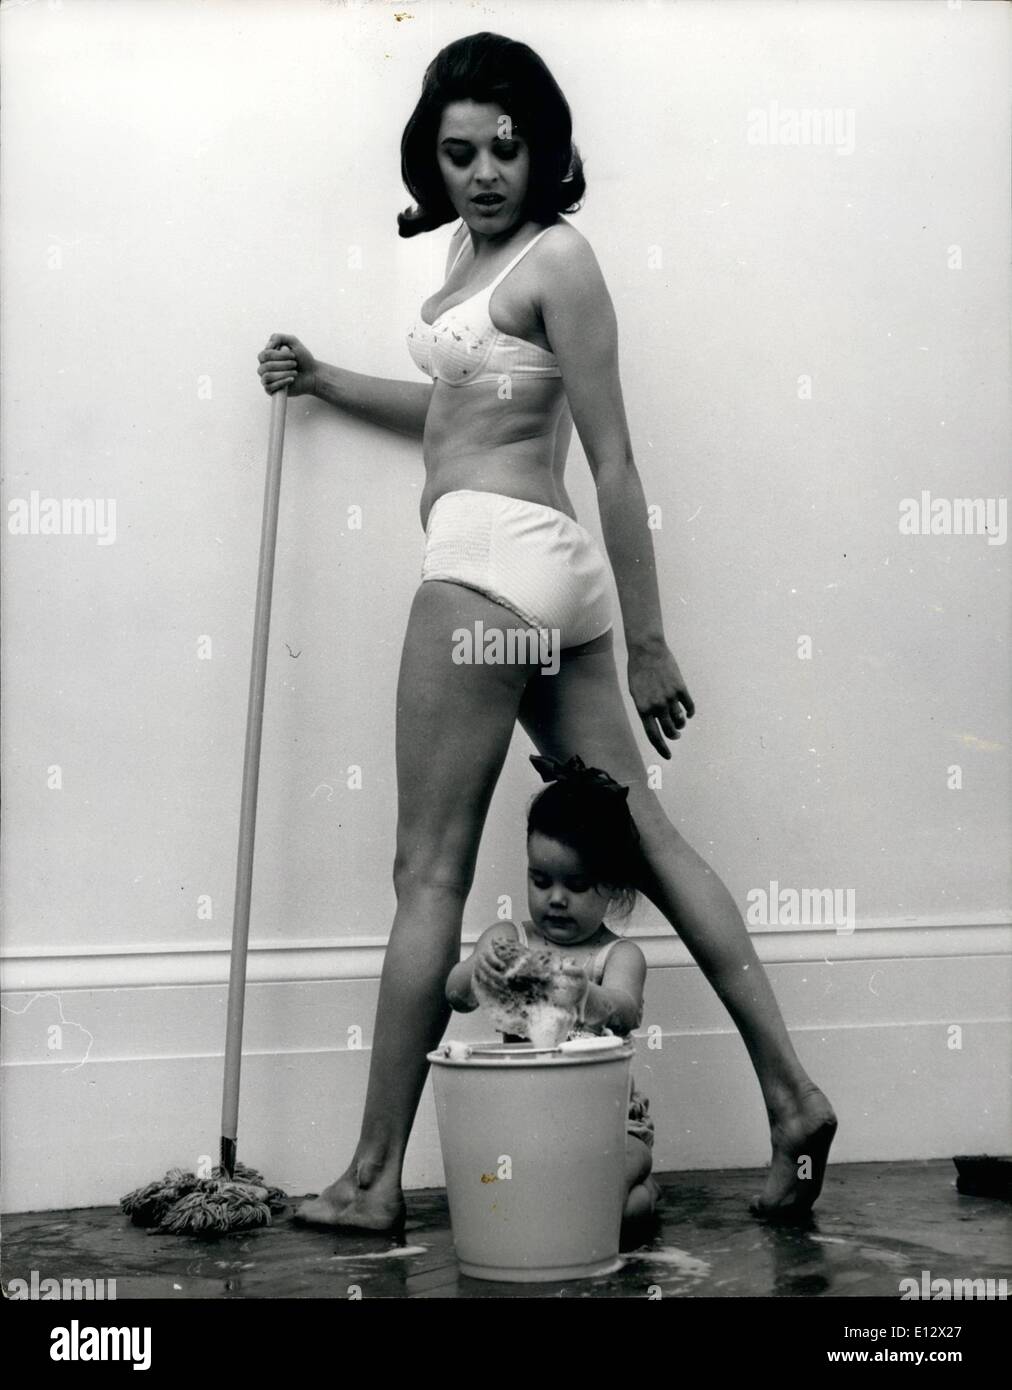 Feb. 26, 2012 - Cleaning Up With The New Queen Of Satire: As the time near for the BBC's new satire show which will replace ''Not so Much...'' Lynda Baron, who is Eleanor Bron's successor is making the most of her little spare time by cleaning up in her new London flat. On this task Lynda, red-headed and twenty five, is helped by her daughter Sarah aged 2 1/2. Being a realist, Lynda resses properly for the job in hand - and what more suitable attine for a Summer day's scrubbing, than a bikini, and especially when you have a figure like Lynda's and a daughter who likes to help make a splash Stock Photo